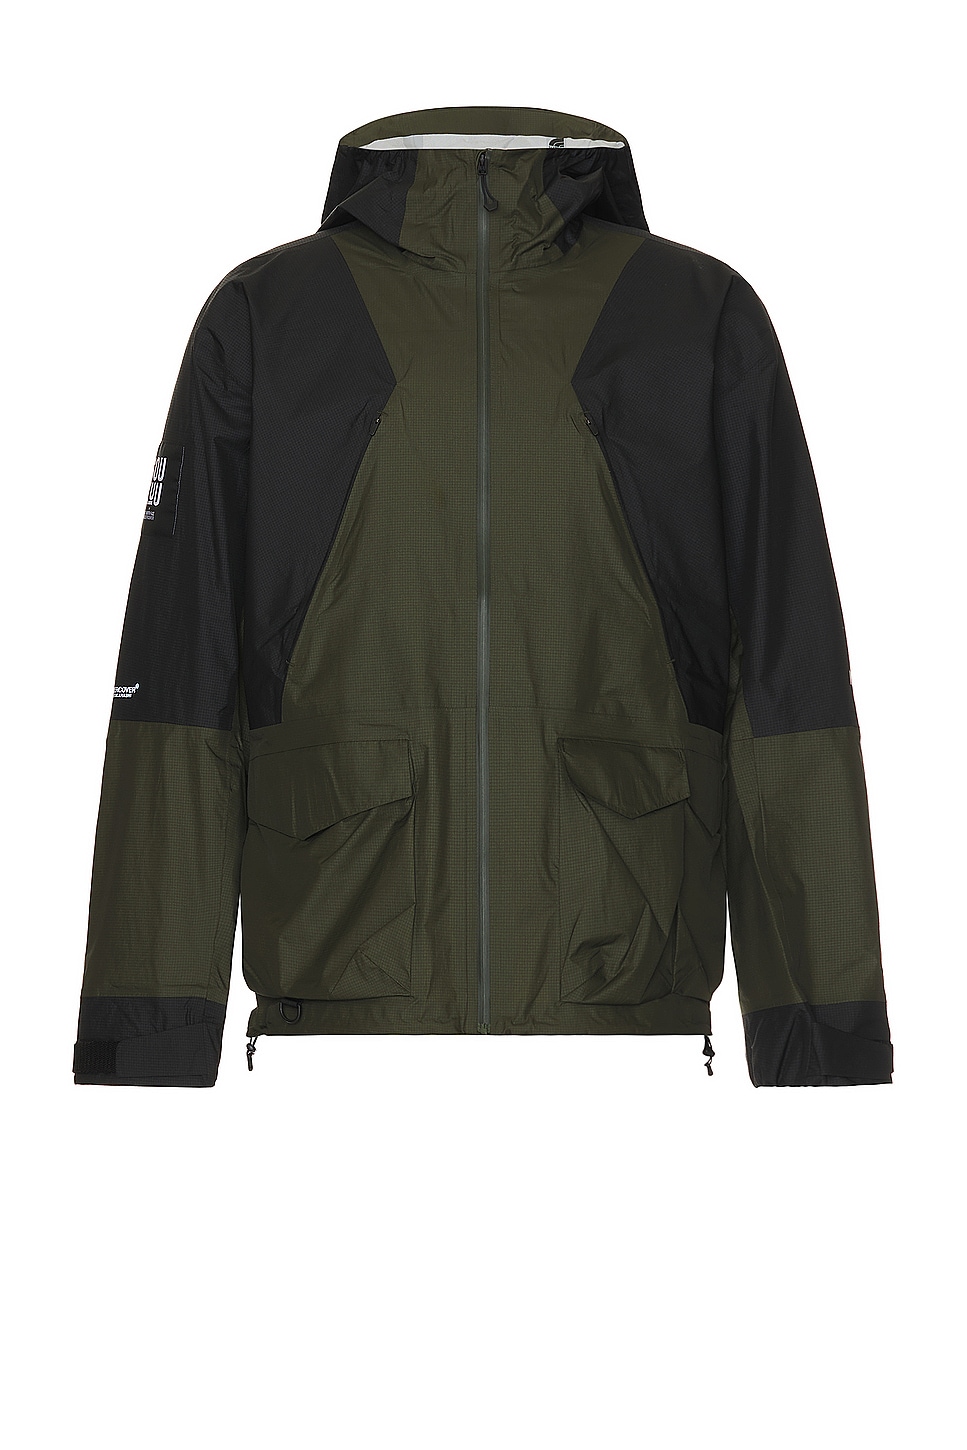 Image 1 of The North Face Soukuu Hike Packable Mountain Light Shell Jacket in Tnf Black & Forest Night